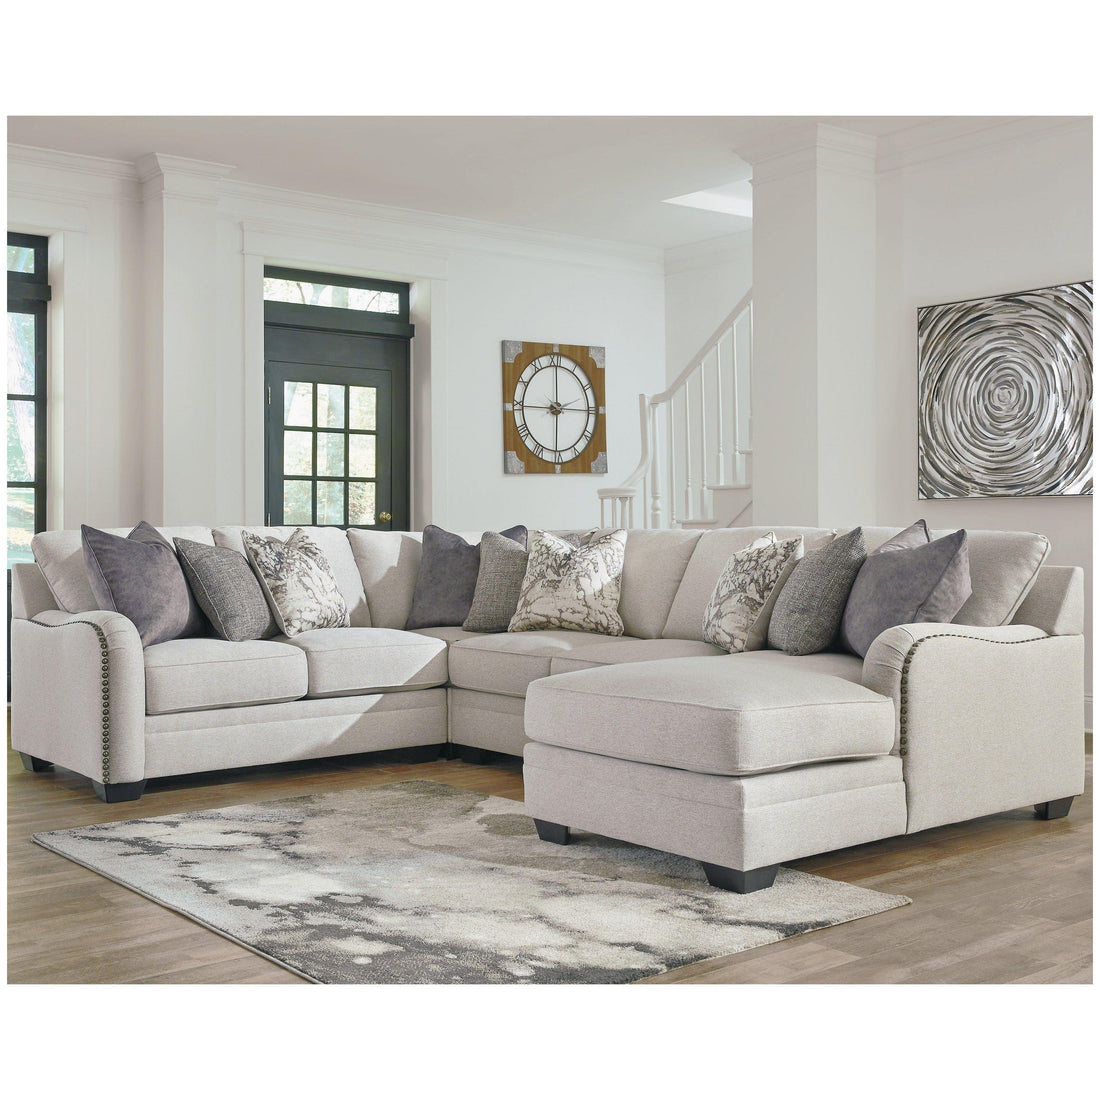 Dellara 4-Piece Sectional with Chaise Ash-32101S6